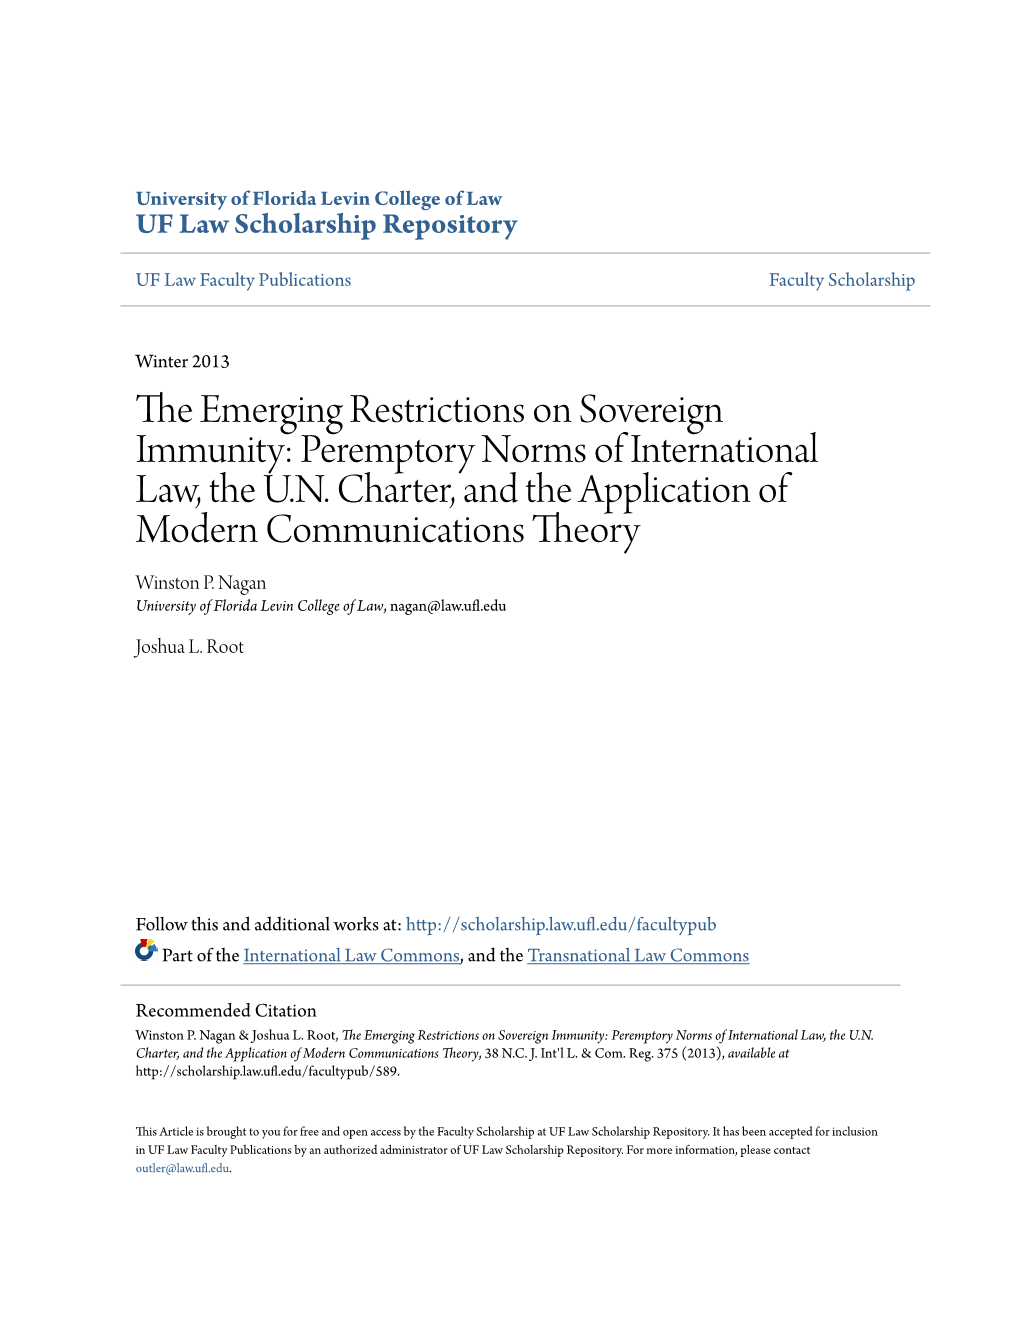 Peremptory Norms of International Law, the U.N. Charter, and the Application of Modern Communications Theory Winston P